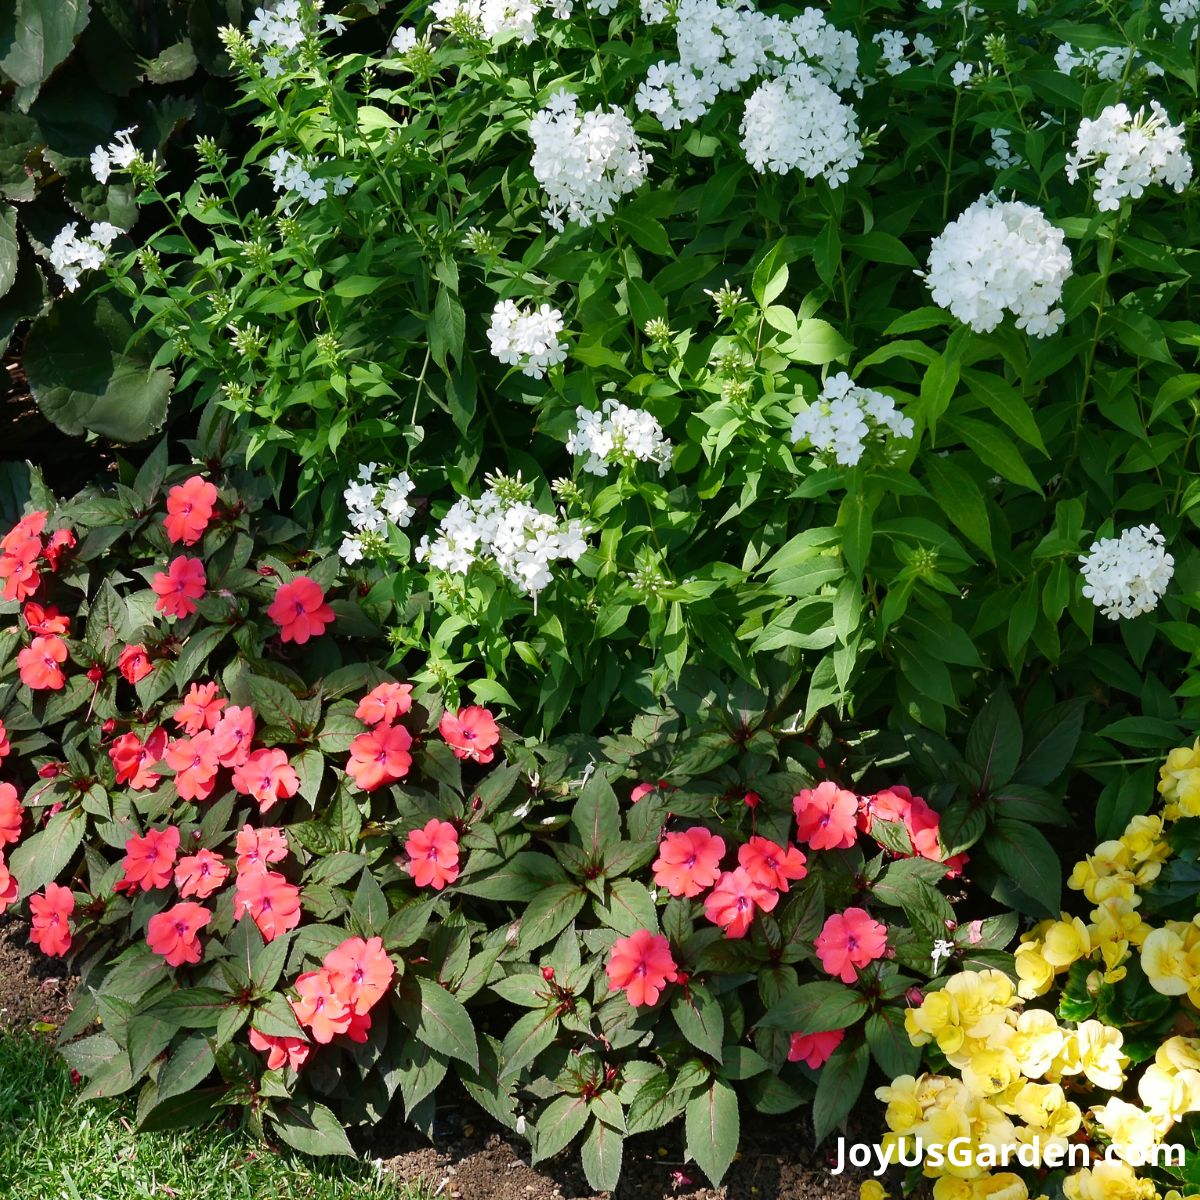 A flower bed with filtered light. The flowers planted New Guinea Impatiens, Phlox, & Begonias in red white and yellow